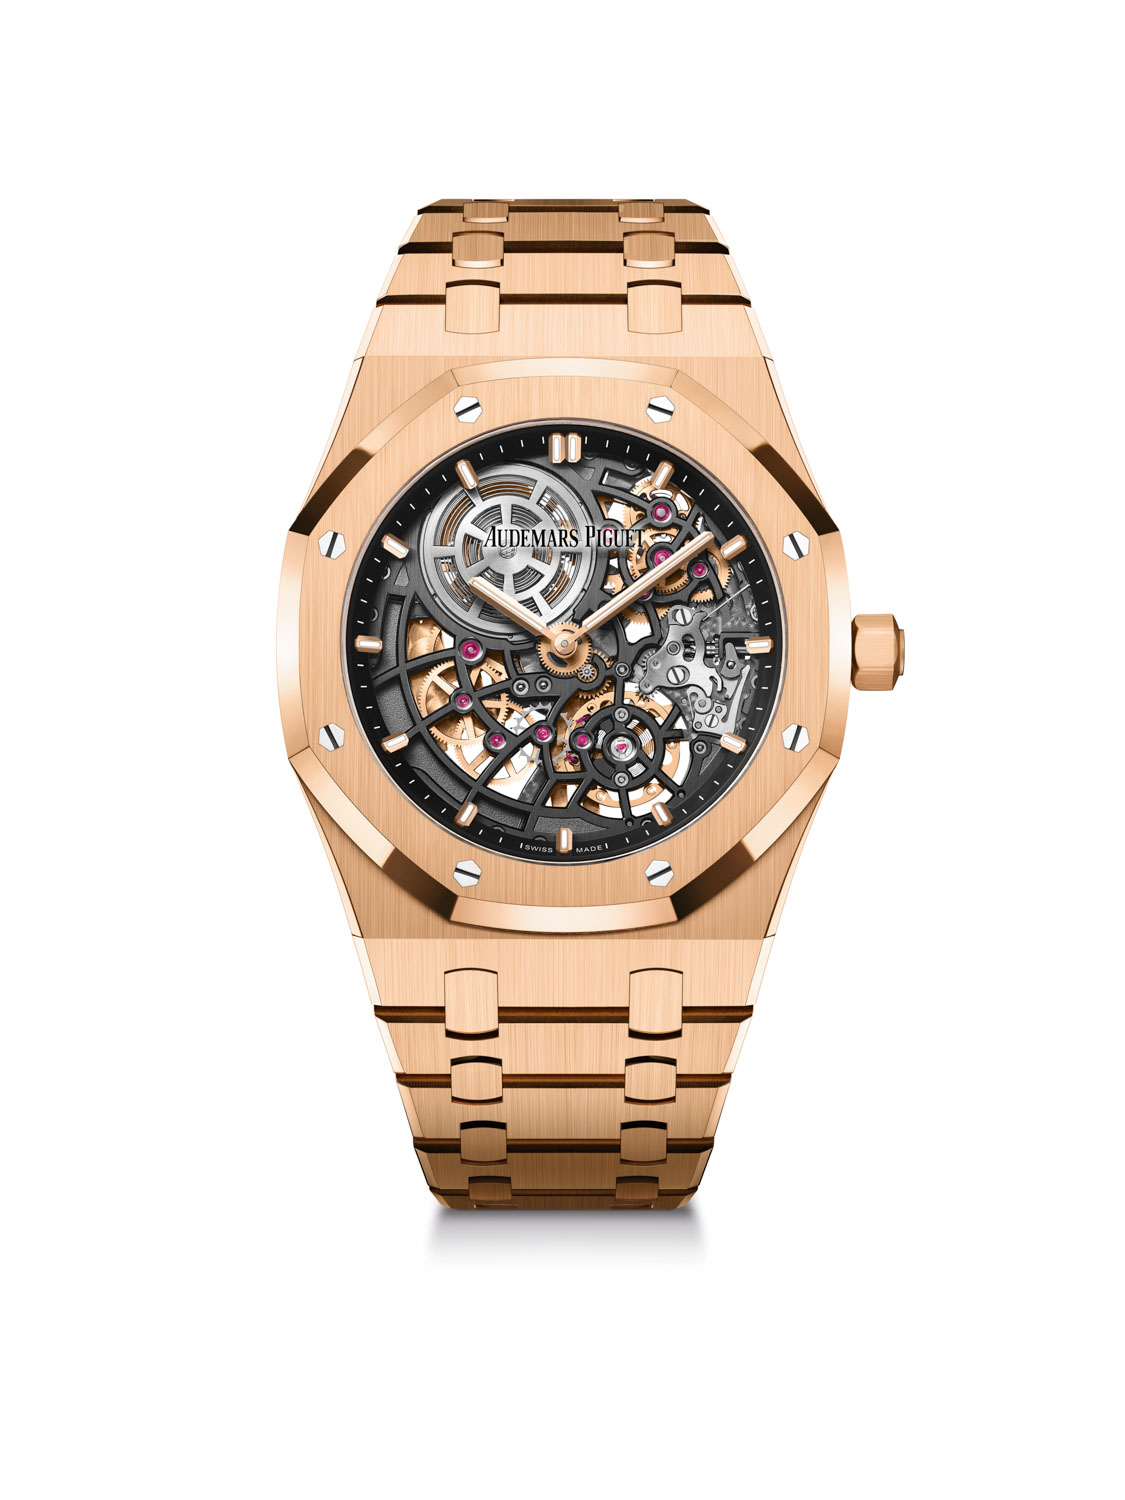 Royal Oak “Jumbo” Extra-Thin Openworked / 39mm; Ref. 16204OR.OO.1240OR.01 in 18-carat pink gold with slate grey openworked movement, pink gold applied hour-markers and Royal Oak hands with luminescent coating, black inner bezel